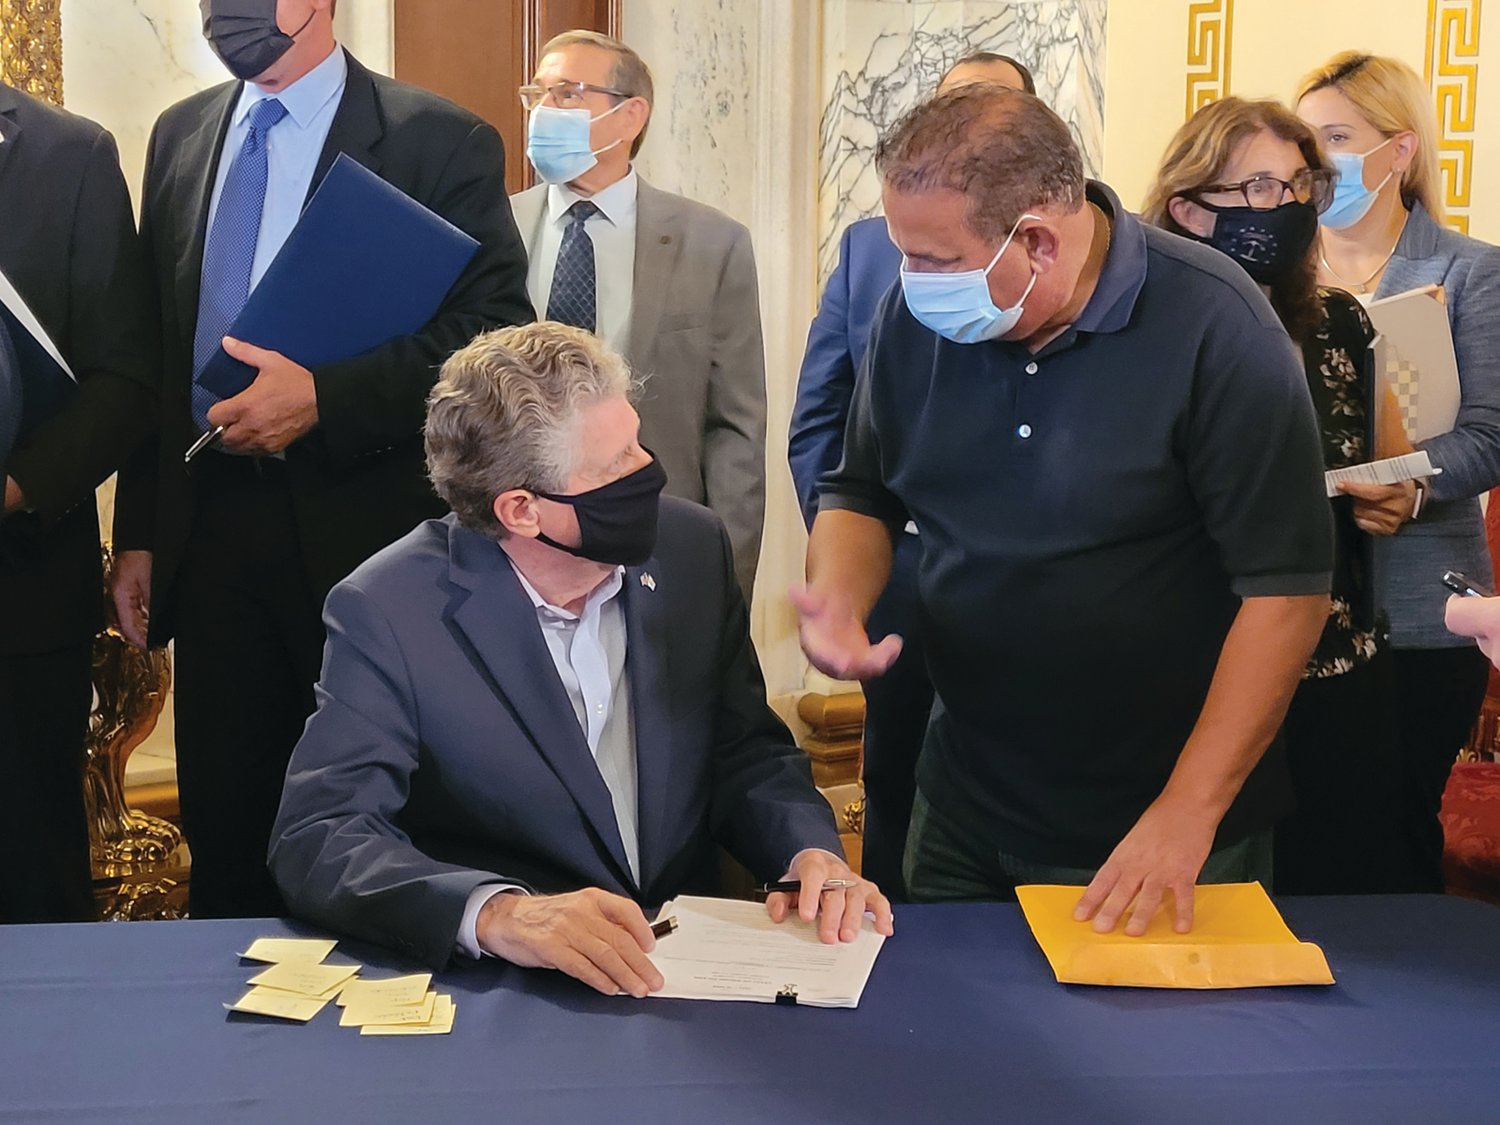 BILL SIGNED: Cranston resident and Johnston native Lou Massemini wanted the governor’s signature on his own copy of the bill. After the bill signing, he approached him, and Gov. Dan McKee offered his autograph one more time.